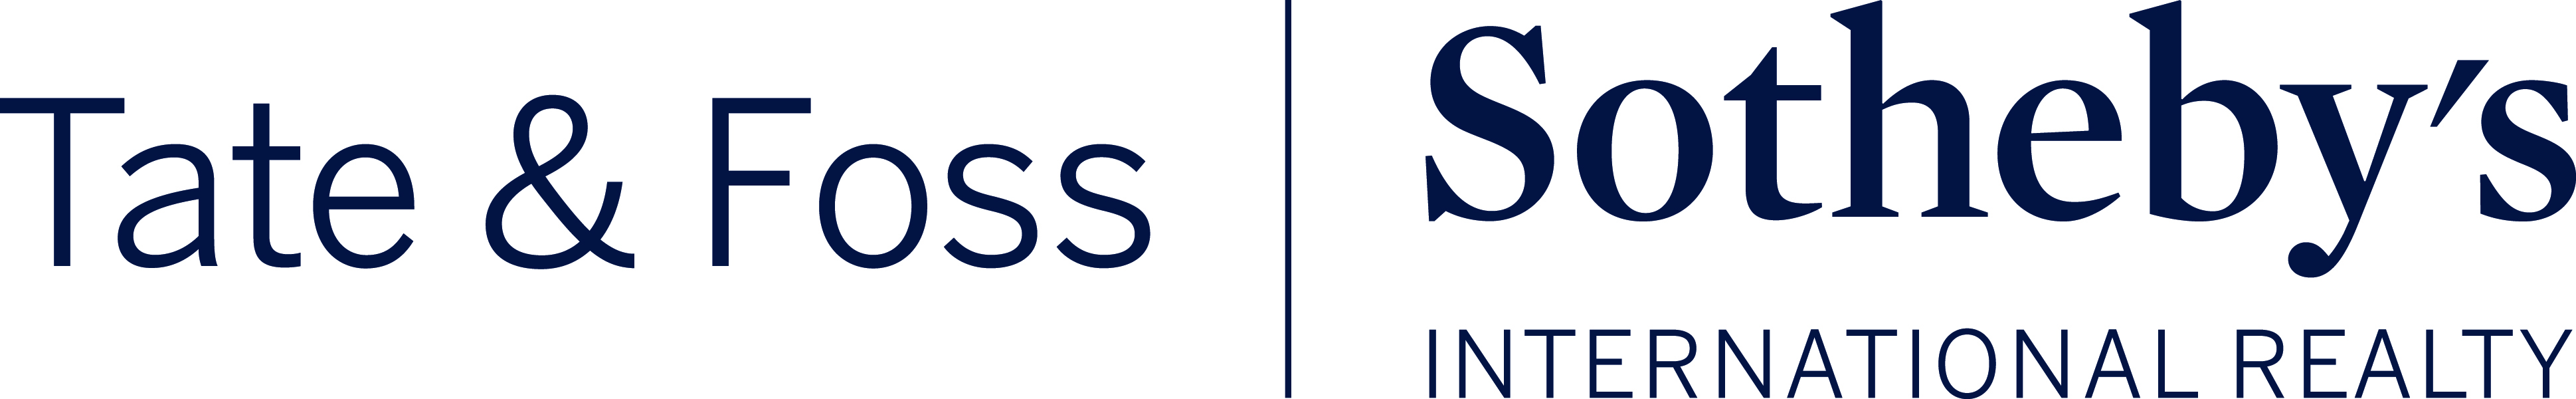 Tate and Foss Sotheby's International Realty logo